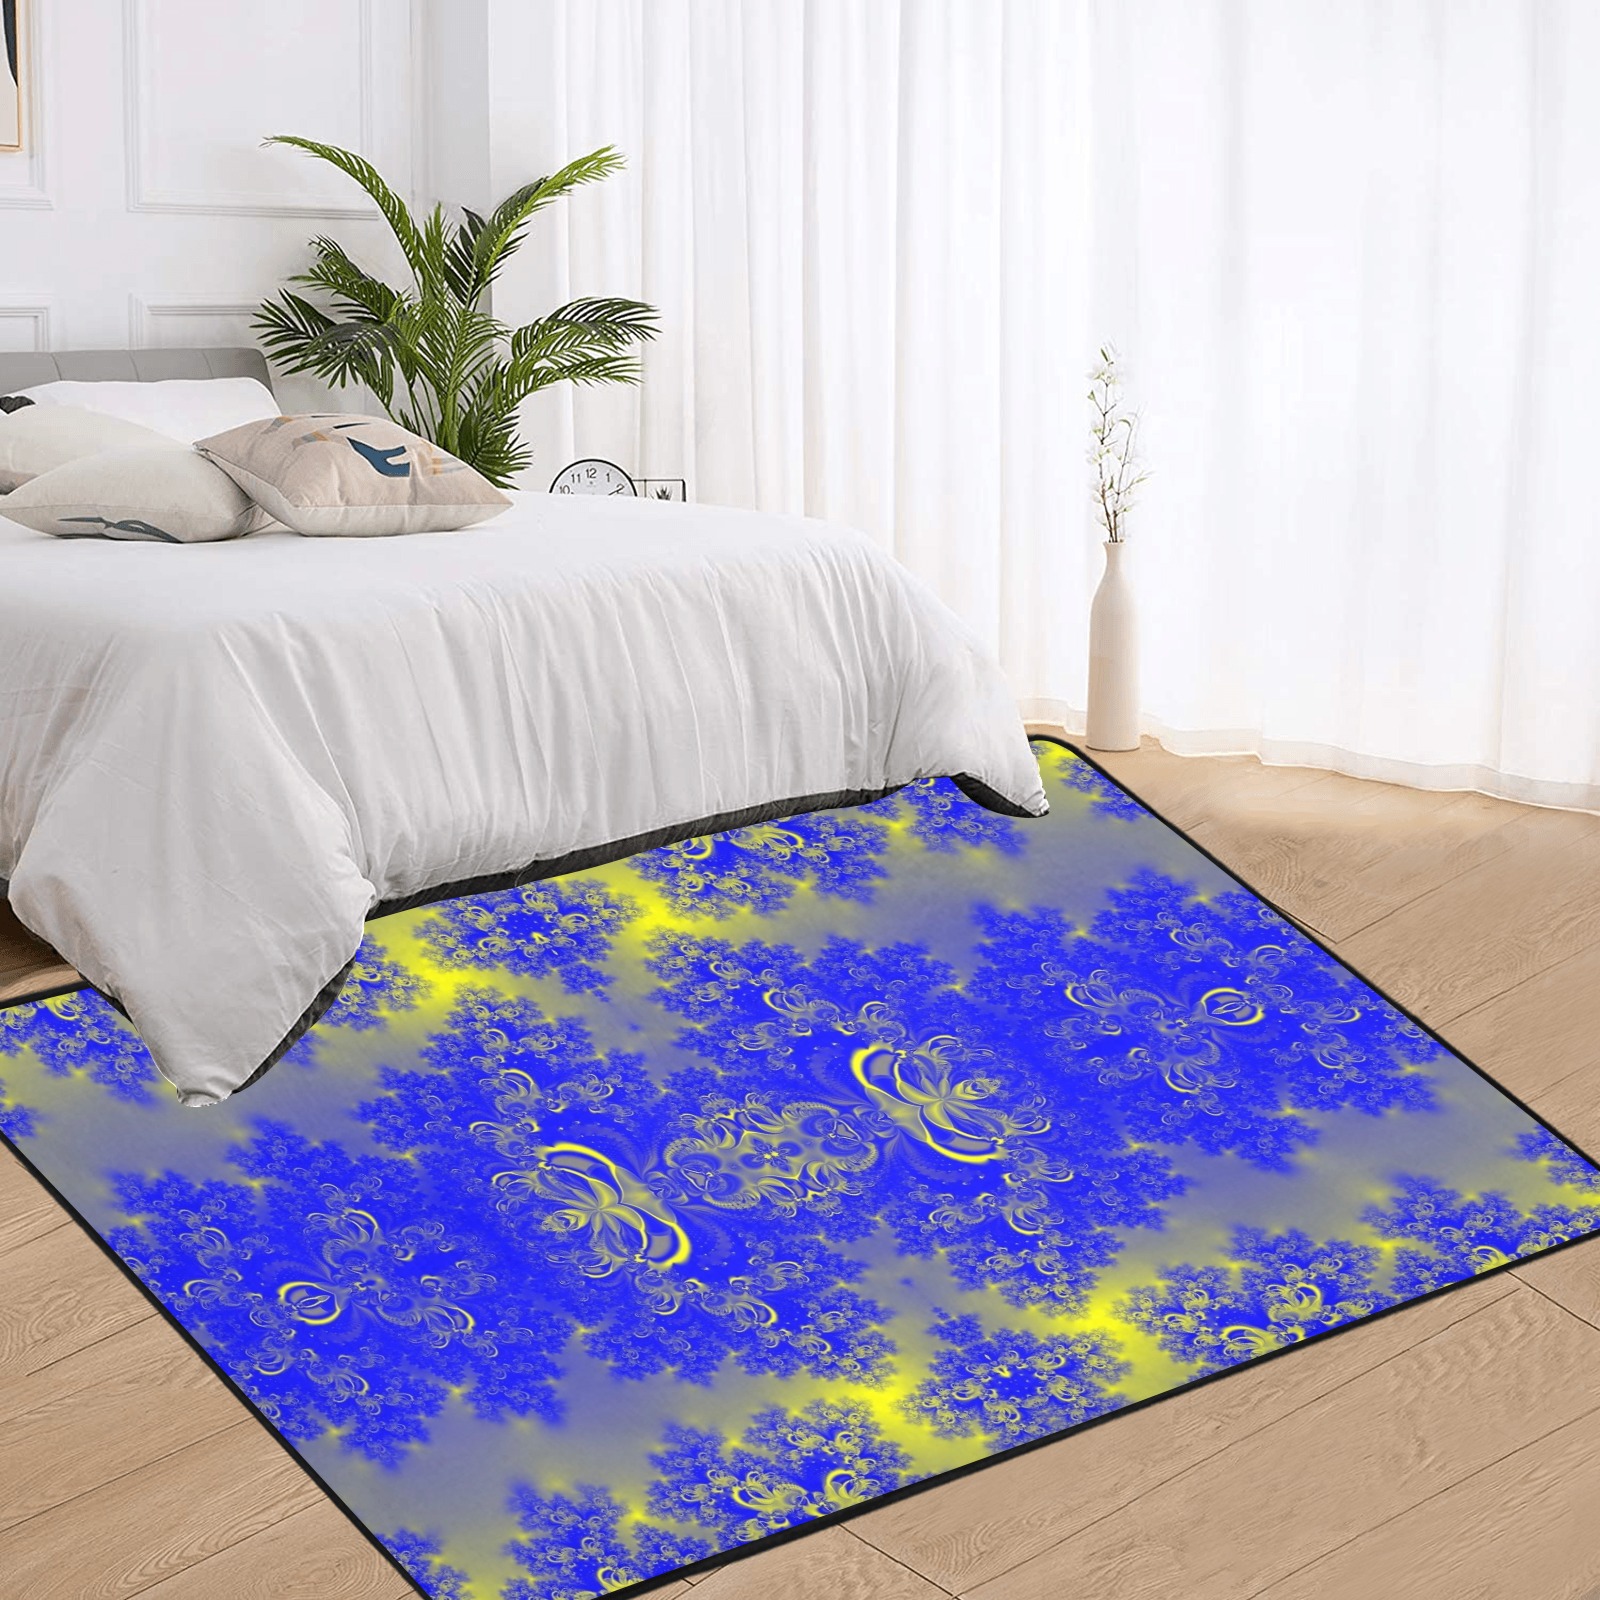 Sunlight and Blueberry Plants Frost Fractal Area Rug with Black Binding 7'x5'